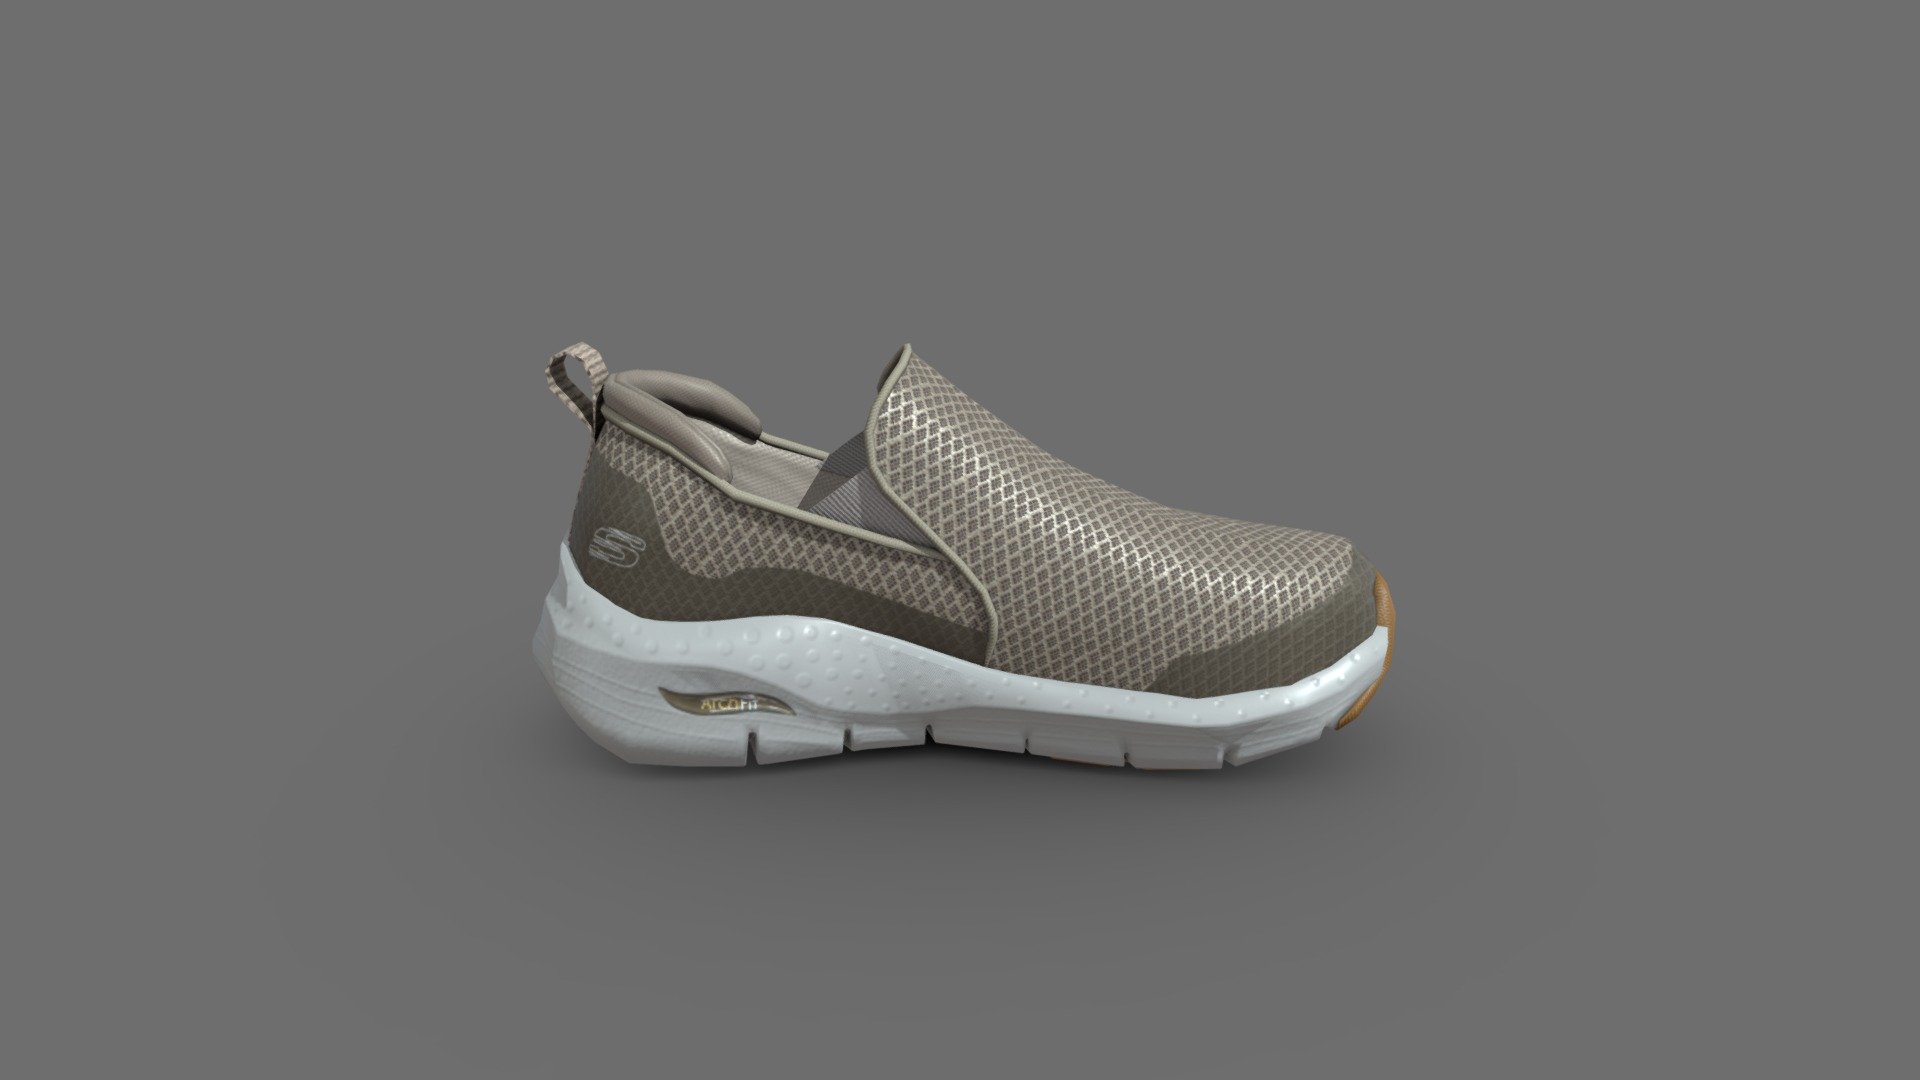 Shoe modeled for VR engine. Low'ish polycount 3d model